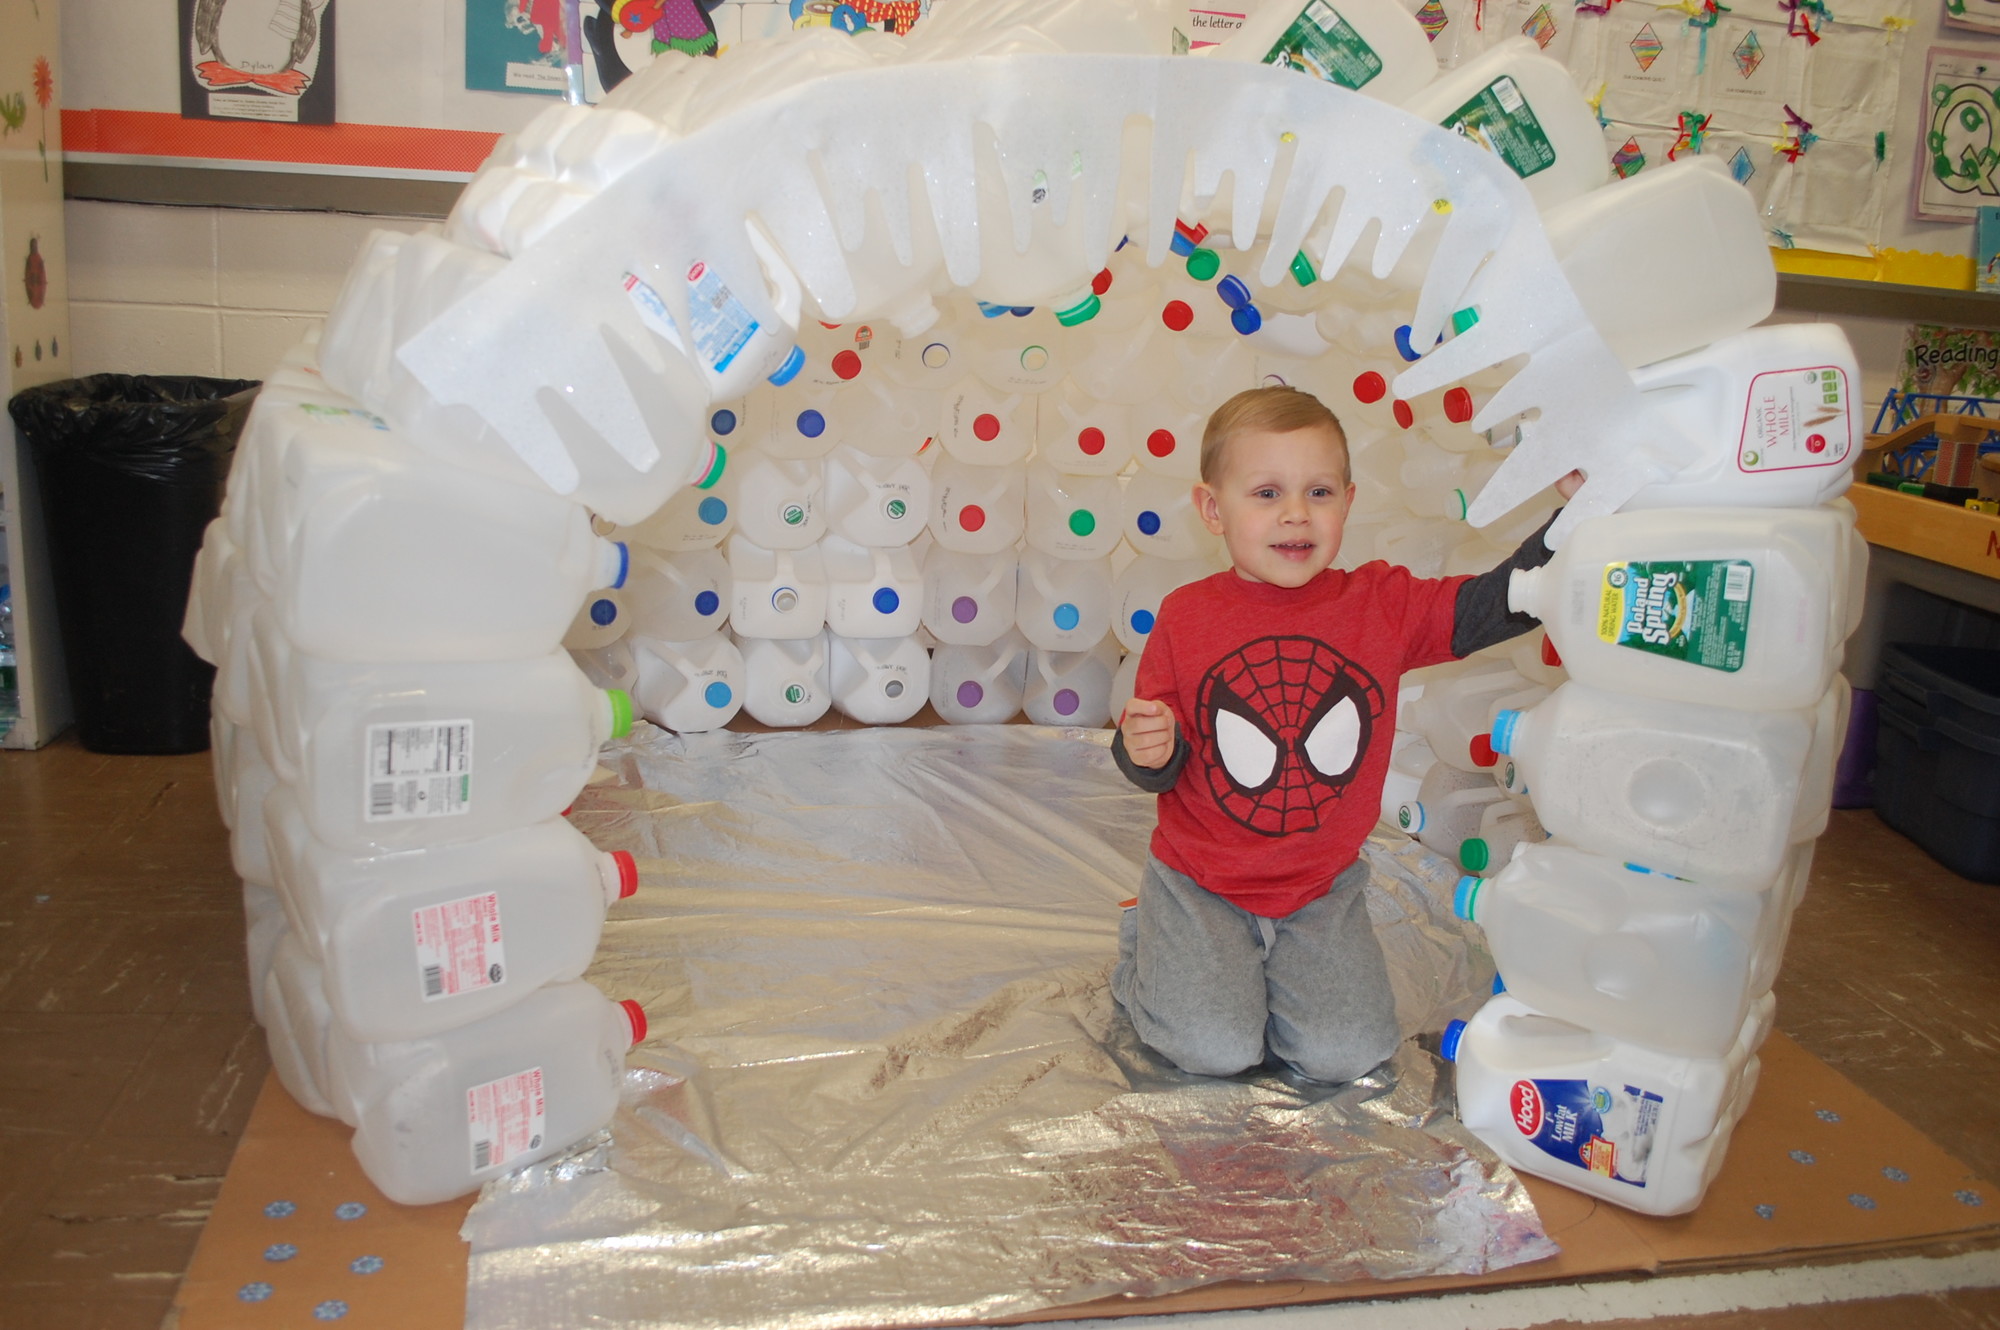 Brian Pietrangelo, 3, who likely will attend nursery school at Maria Regina next year, explored an igloo made from plastic bottles.